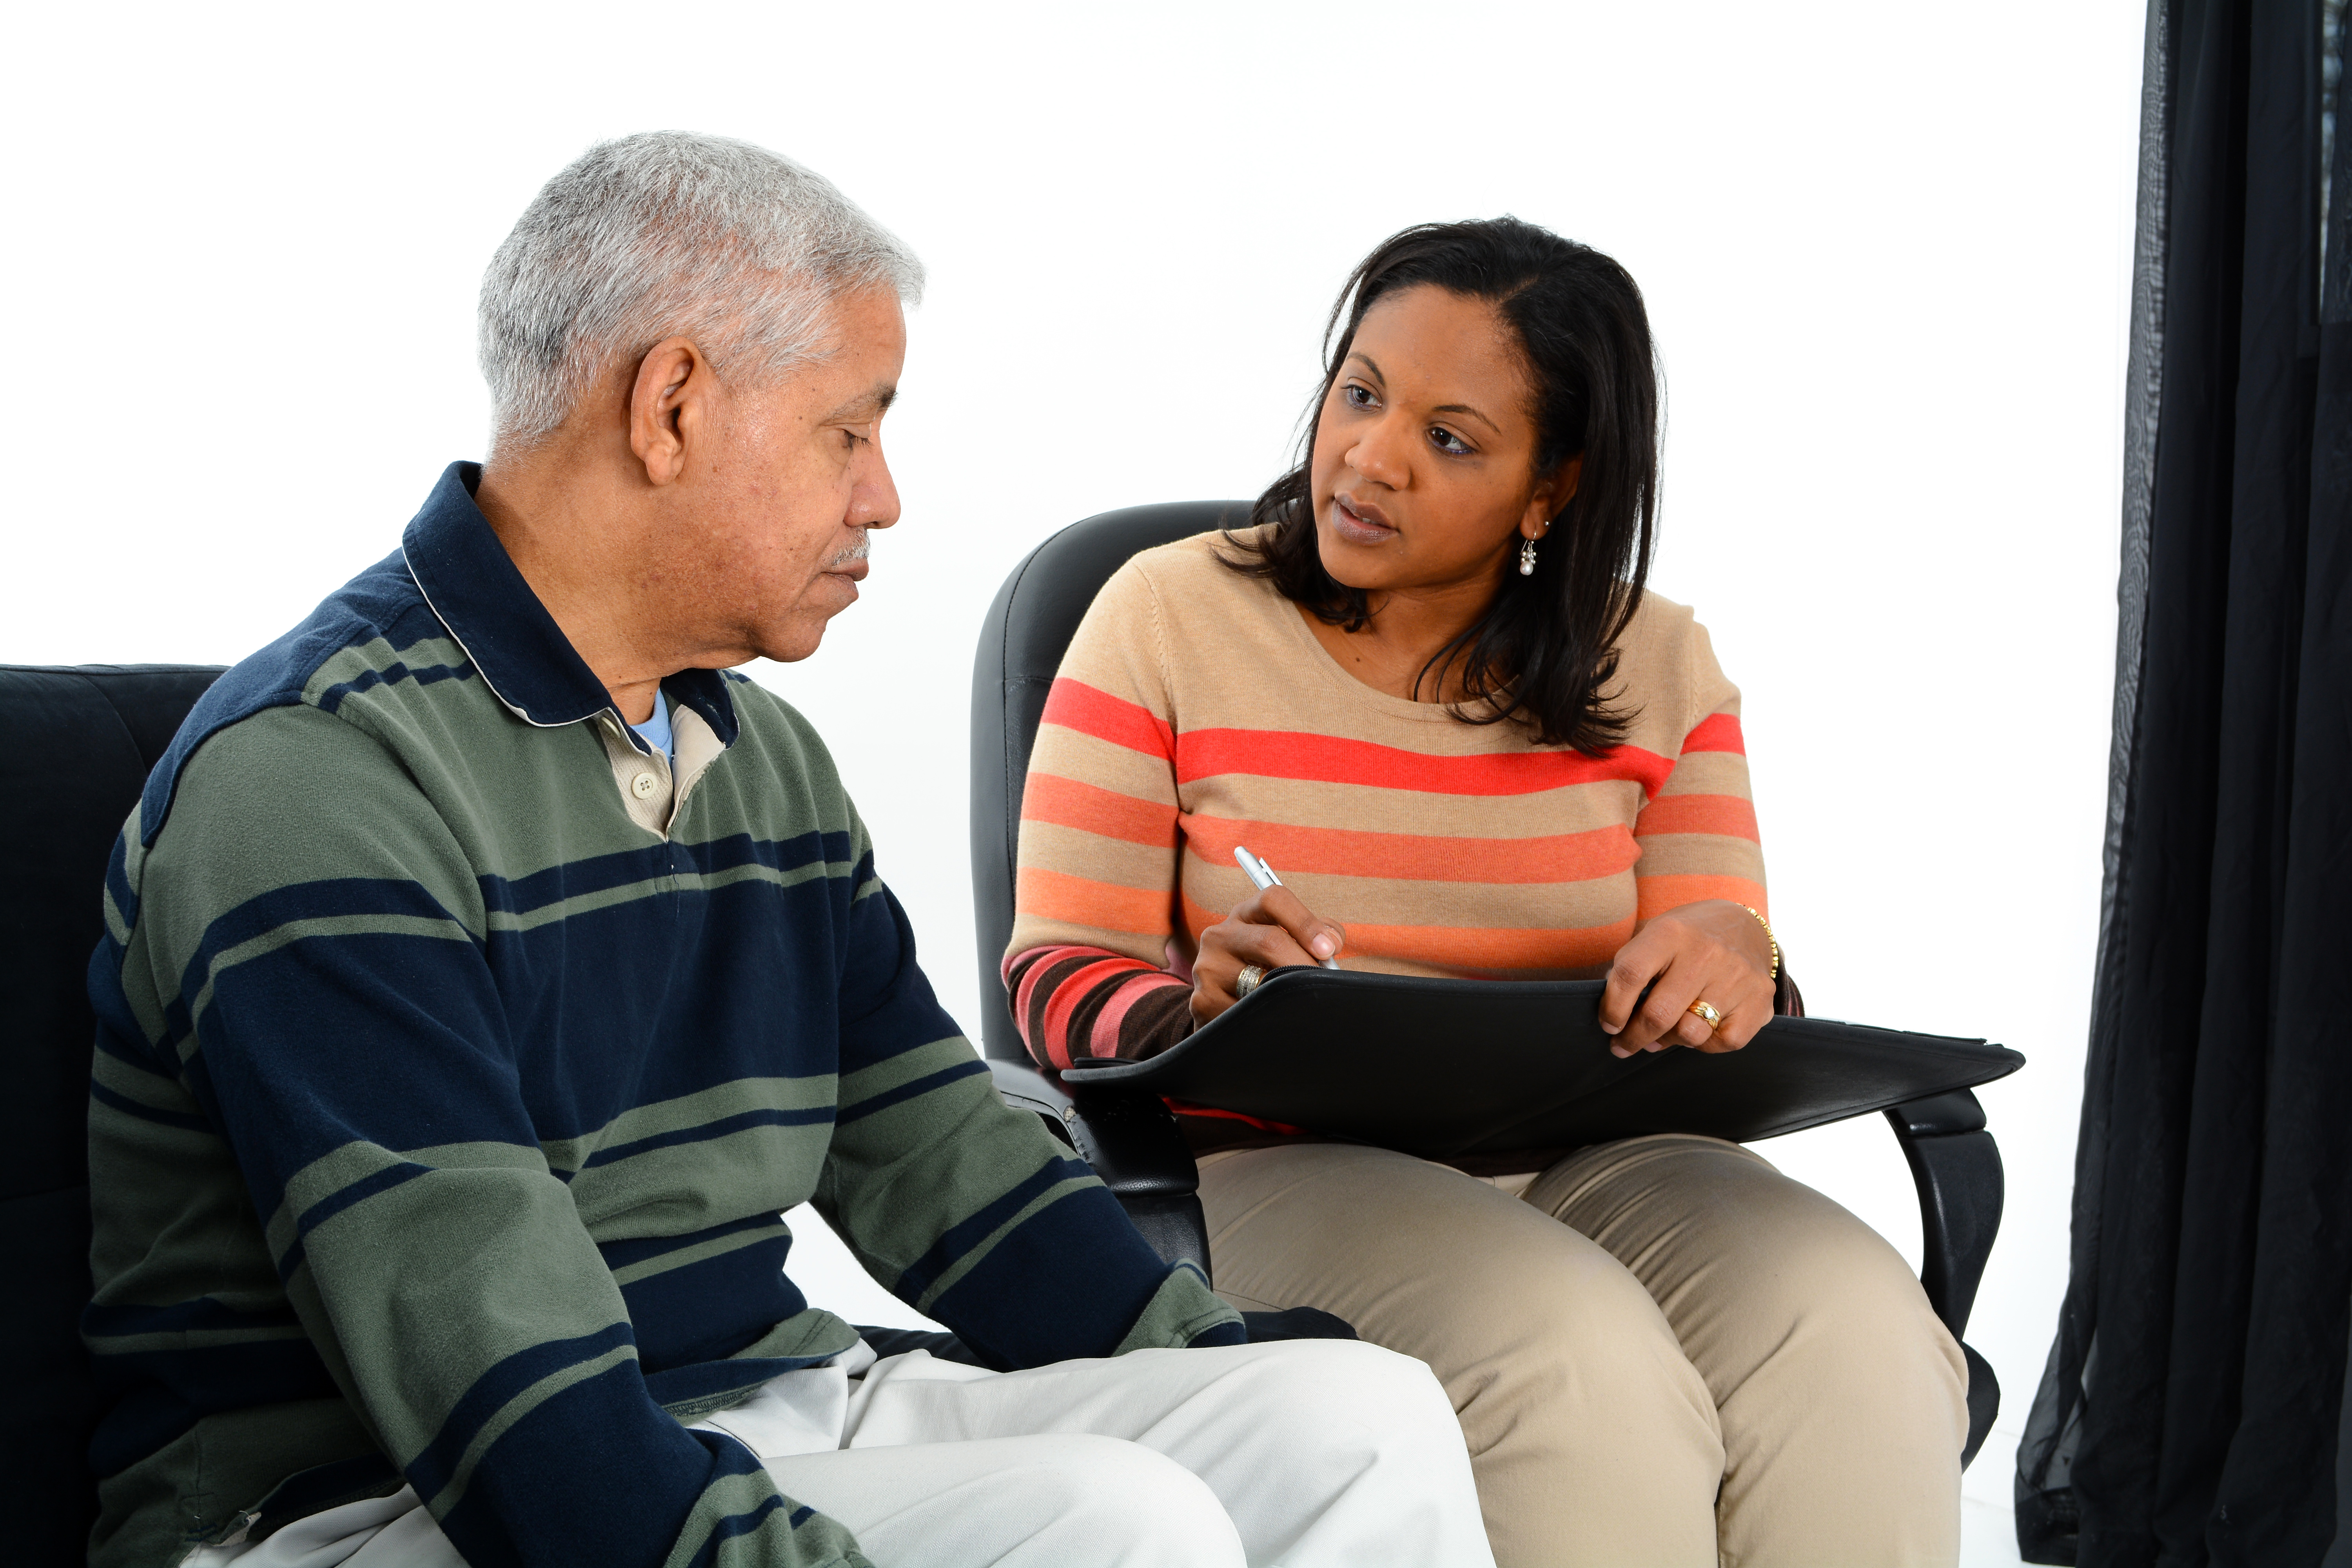 A health geriatric health professional speaking to an older adult.